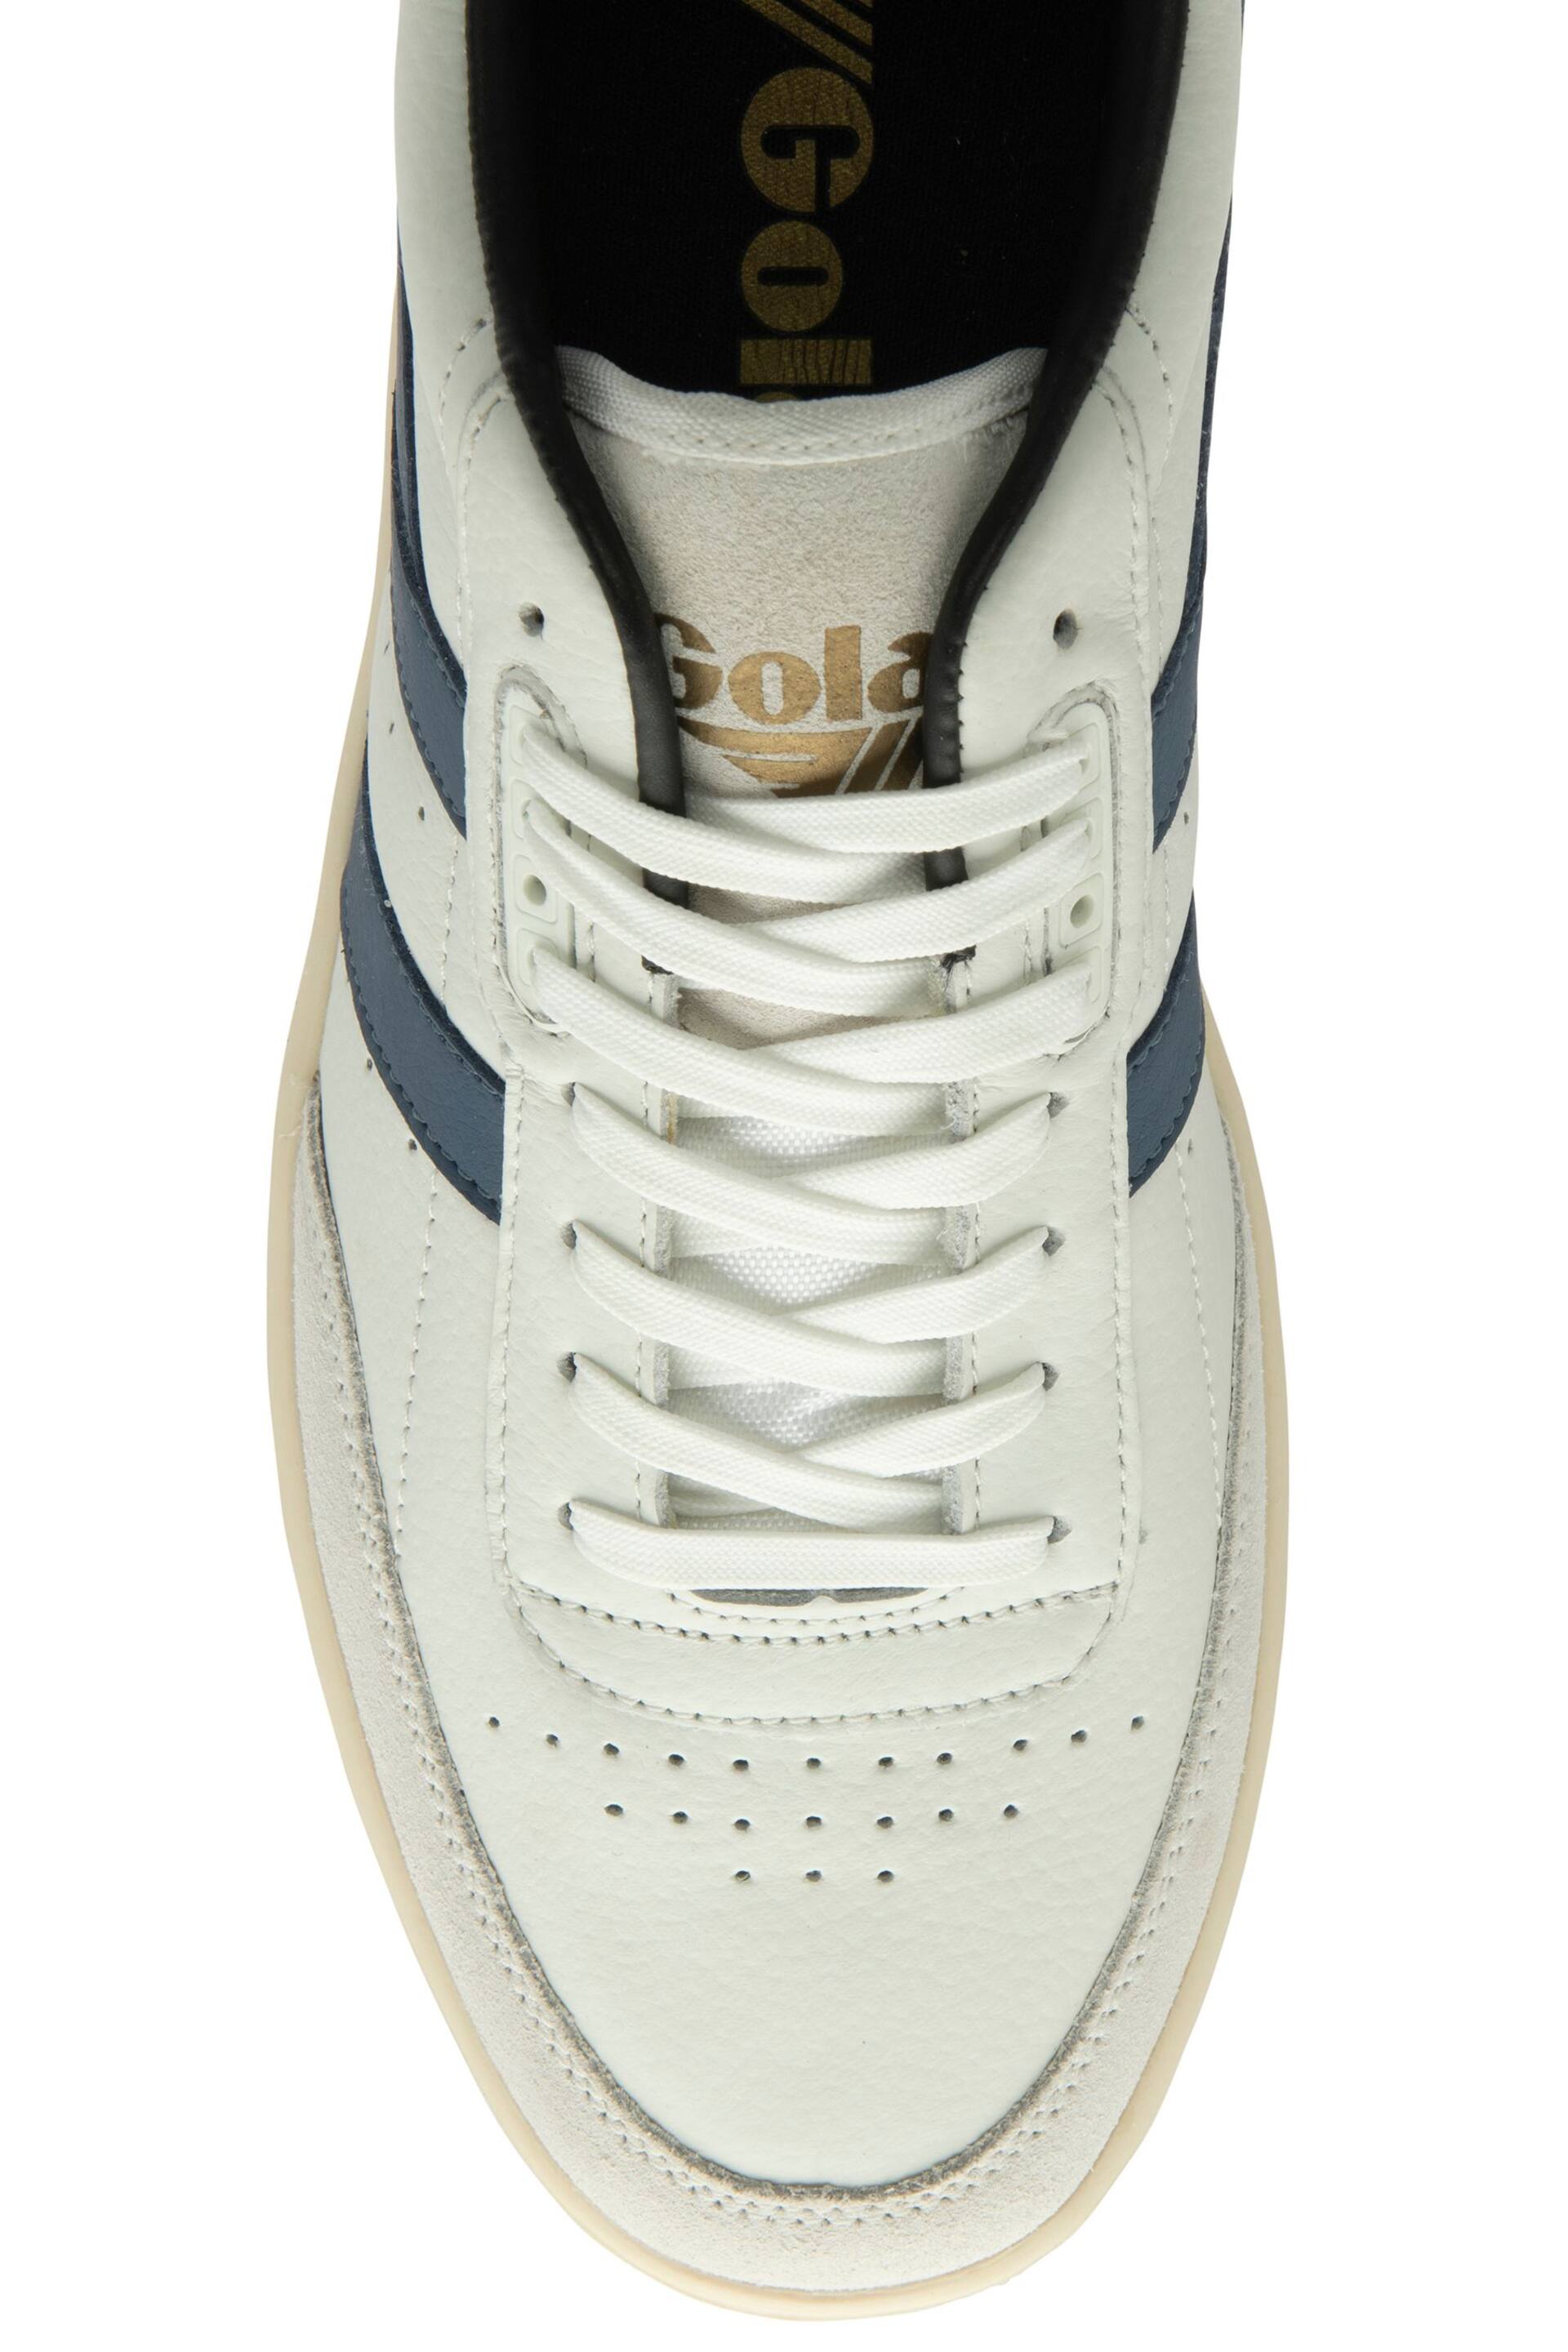 Gola White Mens  Contact Leather Lace-Up Trainers - Image 4 of 4